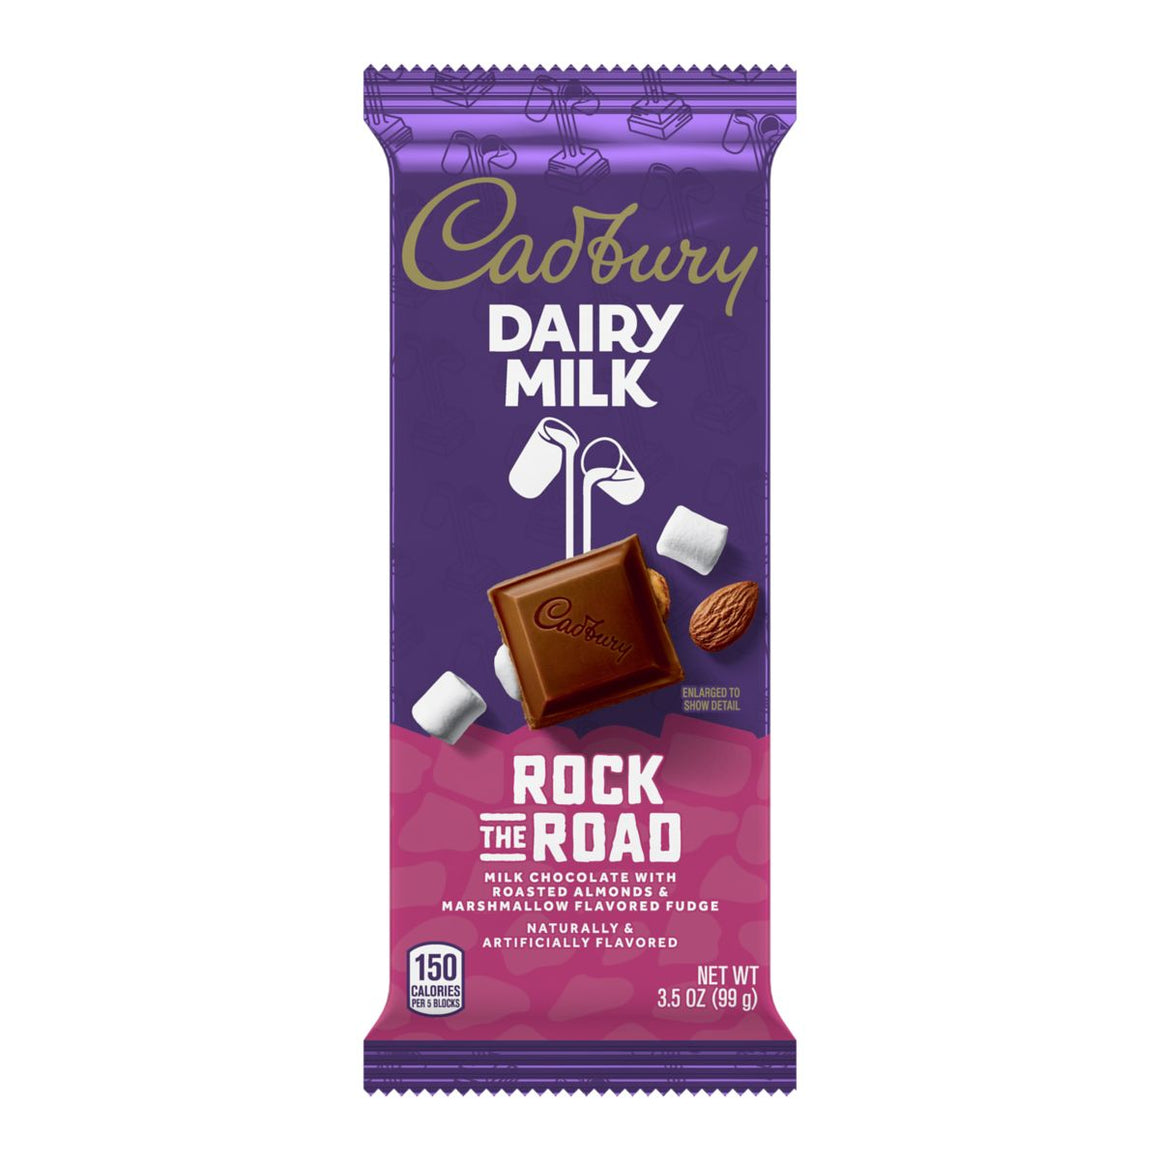 All City Candy Cadbury Dairy Milk Rock the Road 3.5 oz. Bar Candy Bars Hershey's For fresh candy and great service, visit www.allcitycandy.com